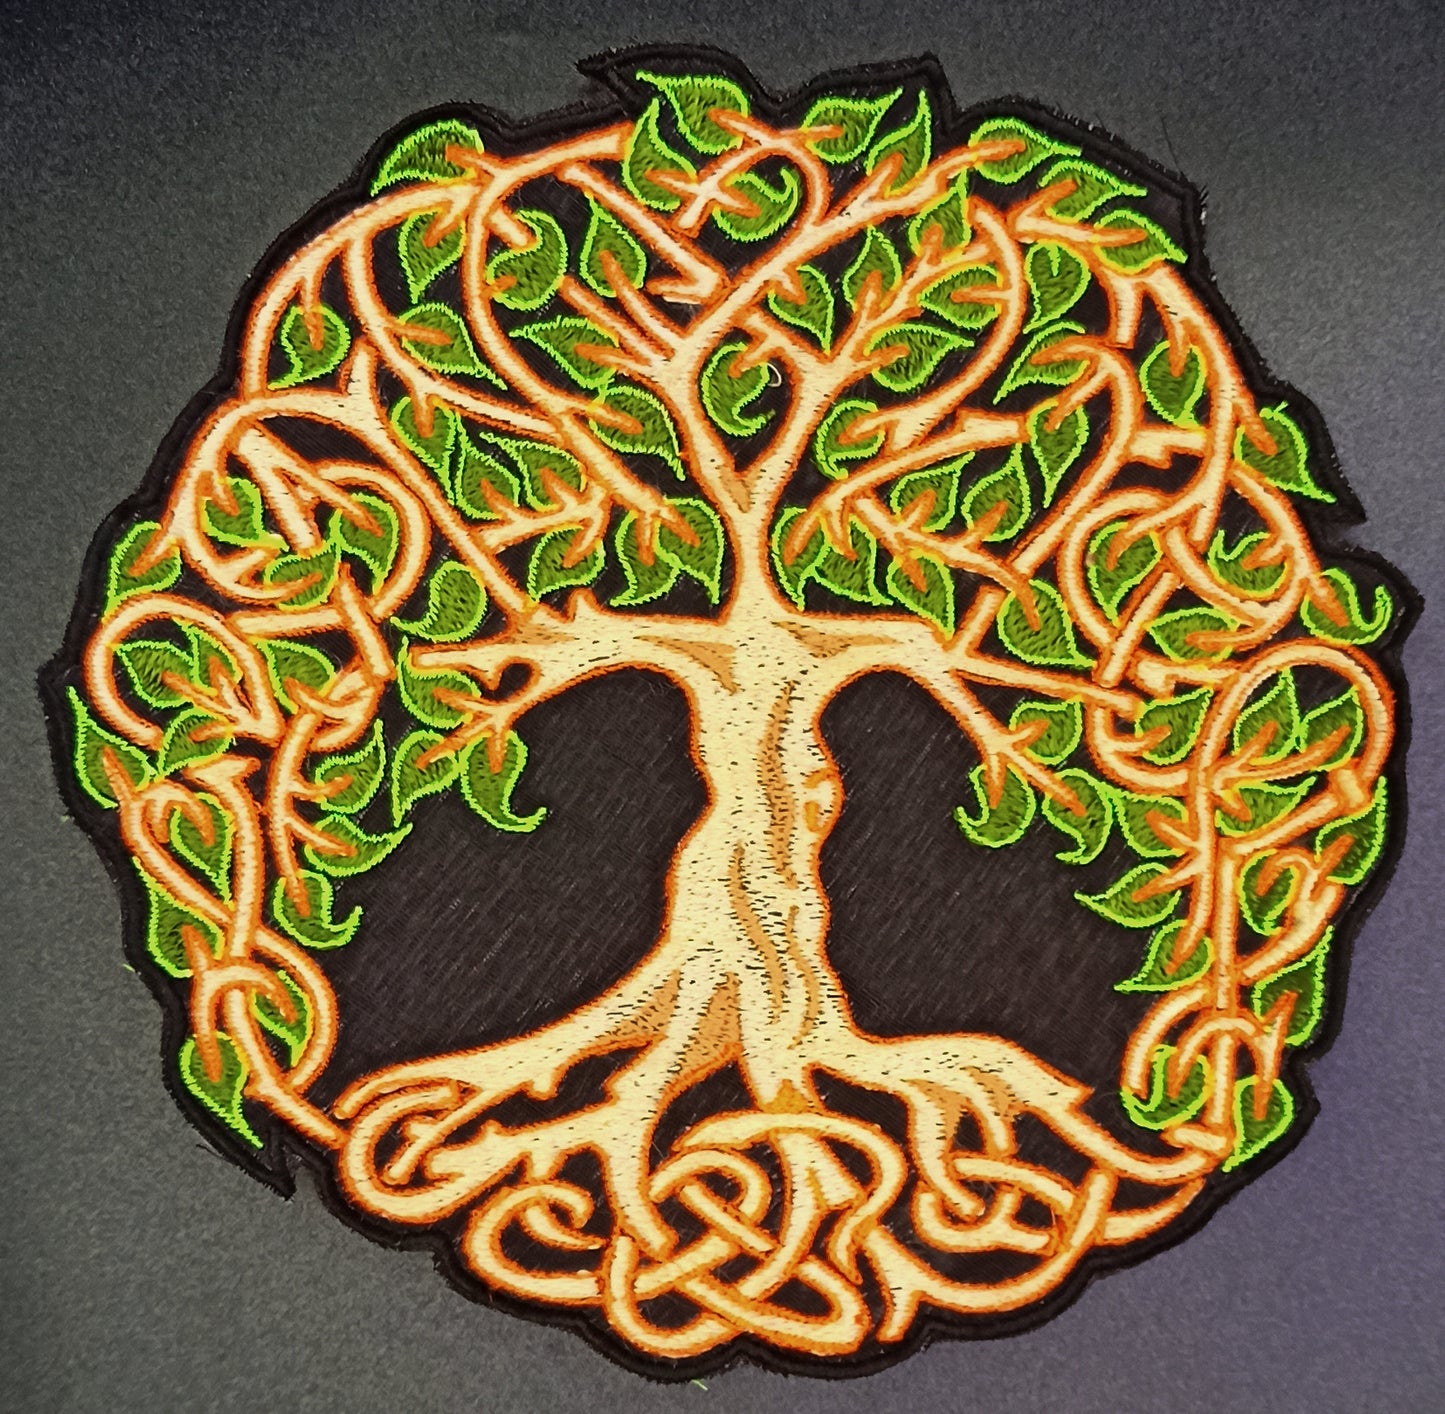 Celtic Tree of Knowledge embroidery art patch blacklight glowing uv active for sew on machine washable ironable druid artpiece